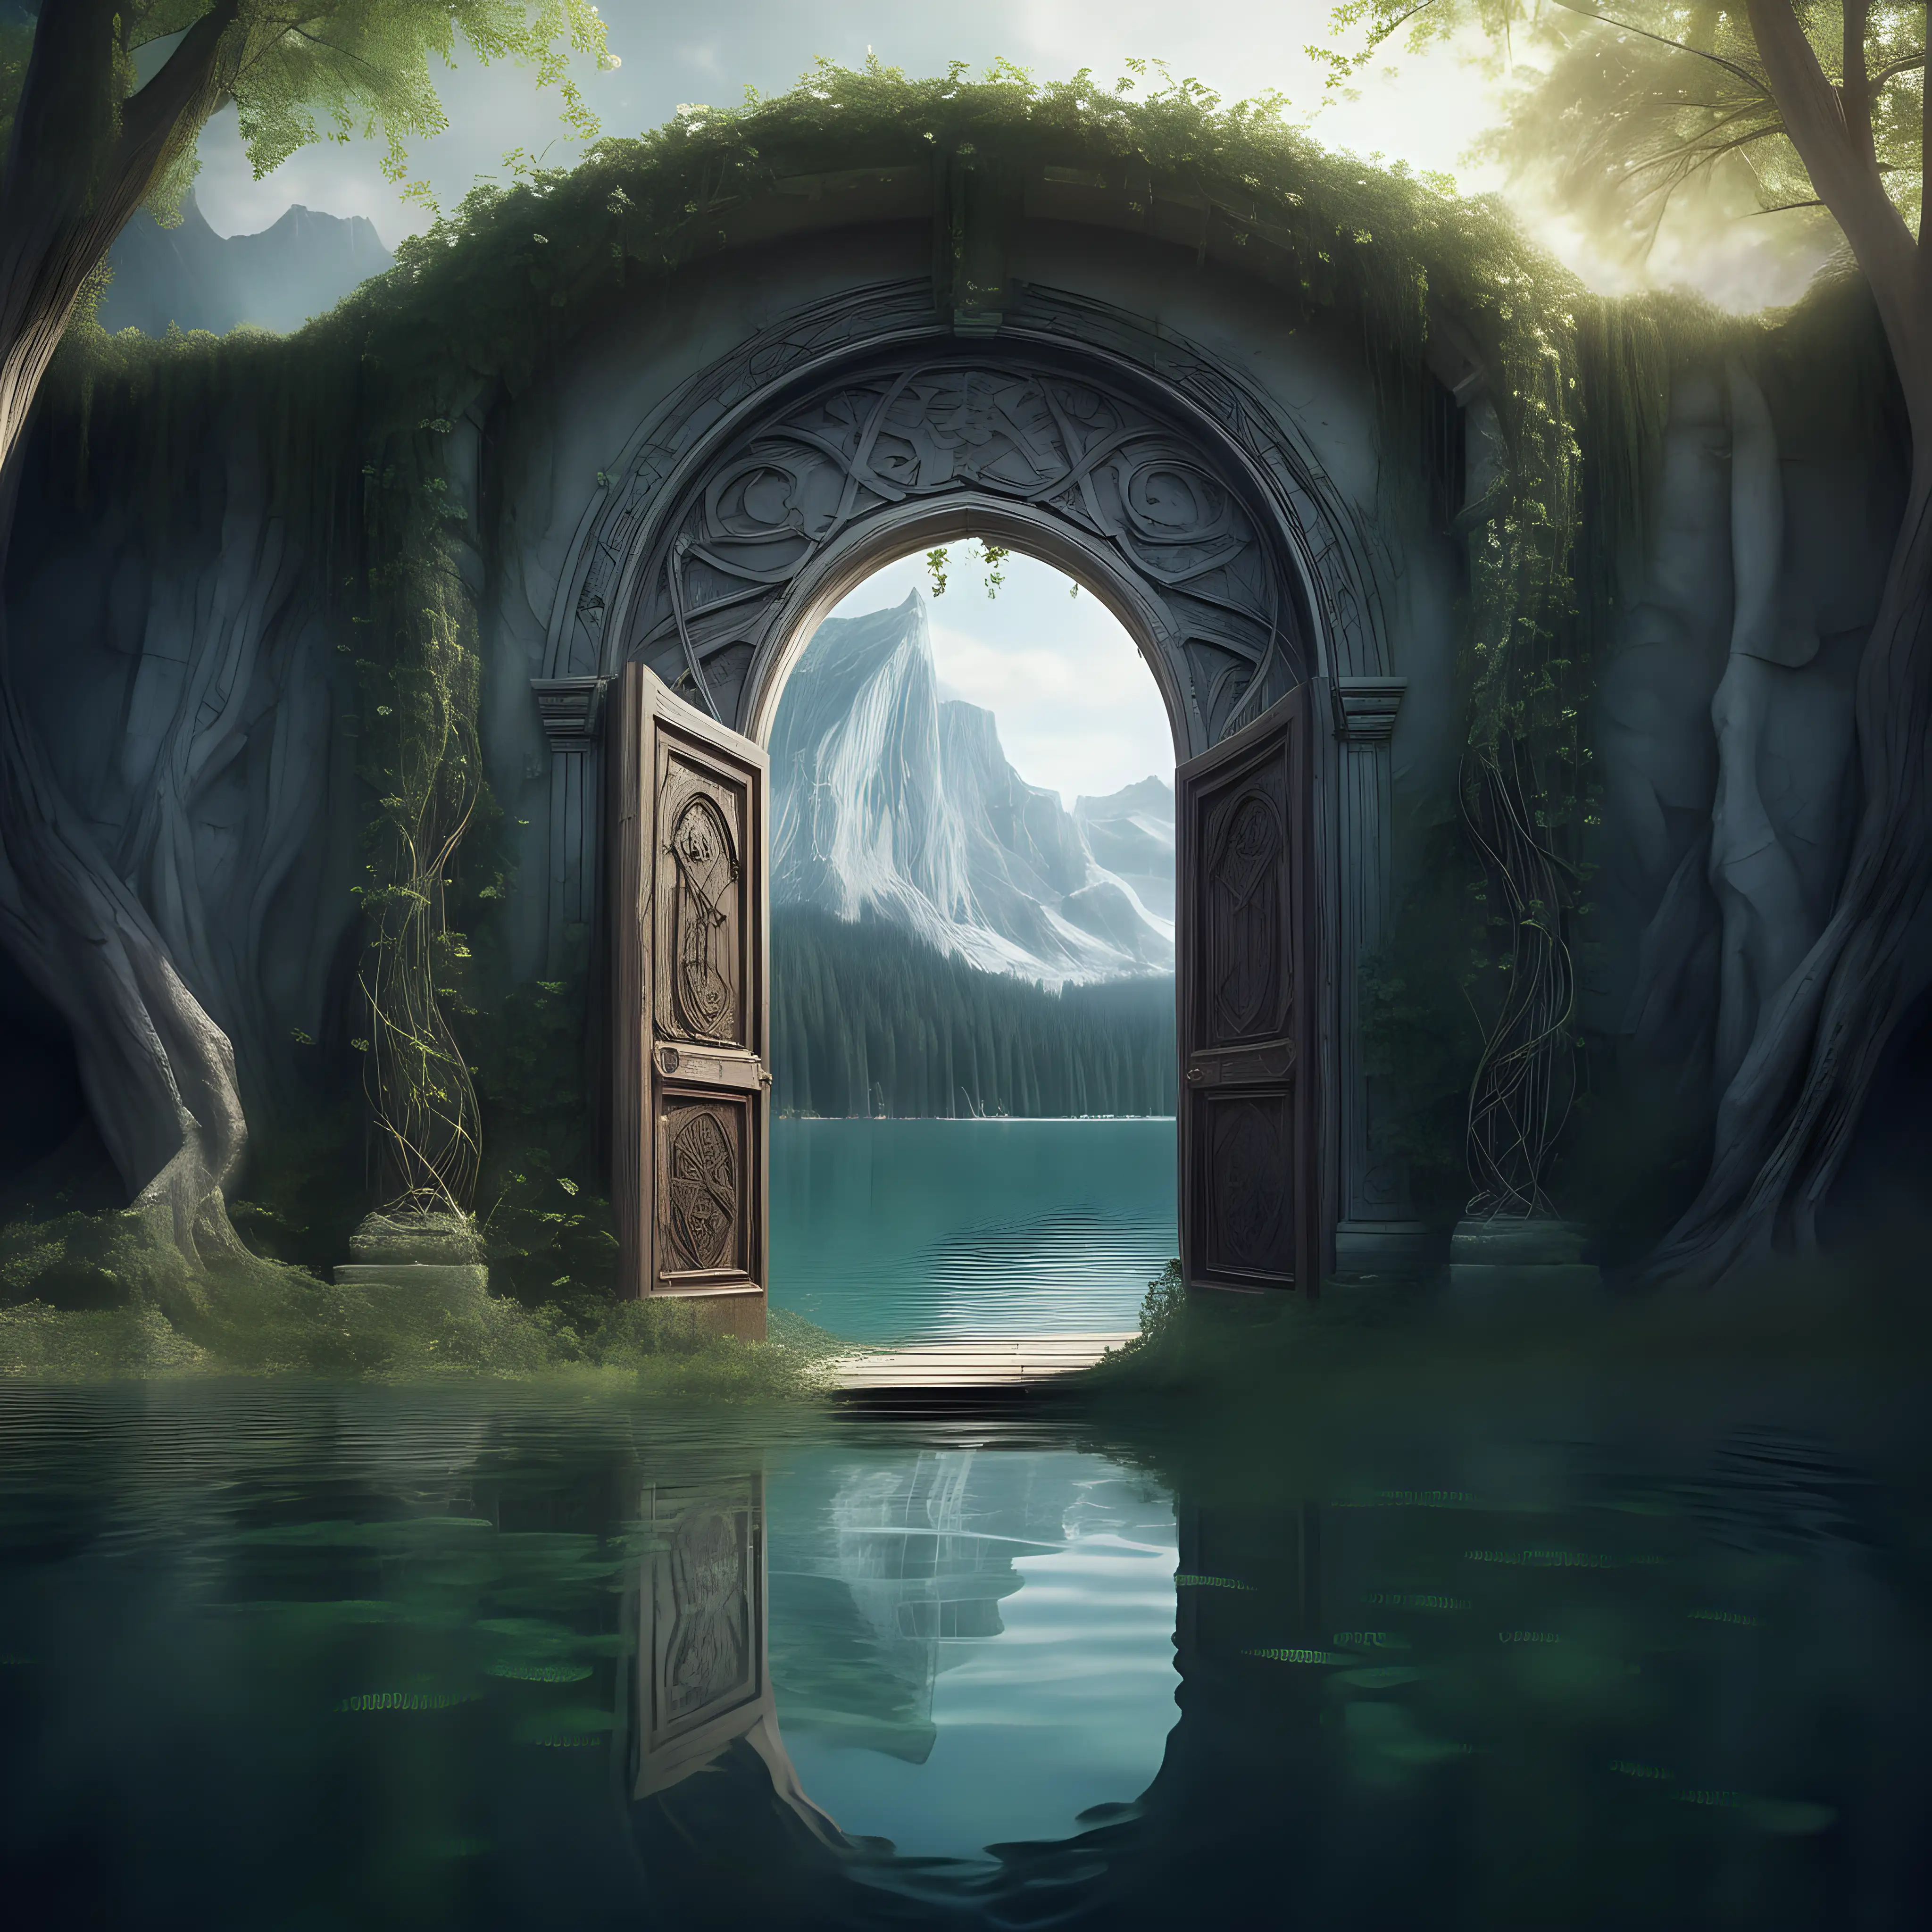  there is a far away mystical place where a vine grows around the crystal lake ,on the crystal lake there is a pathway through an archway with ancient tall carved wooden arched doors that are half open there stands an ancient oval mirror that has has mystical symbols around it's edge